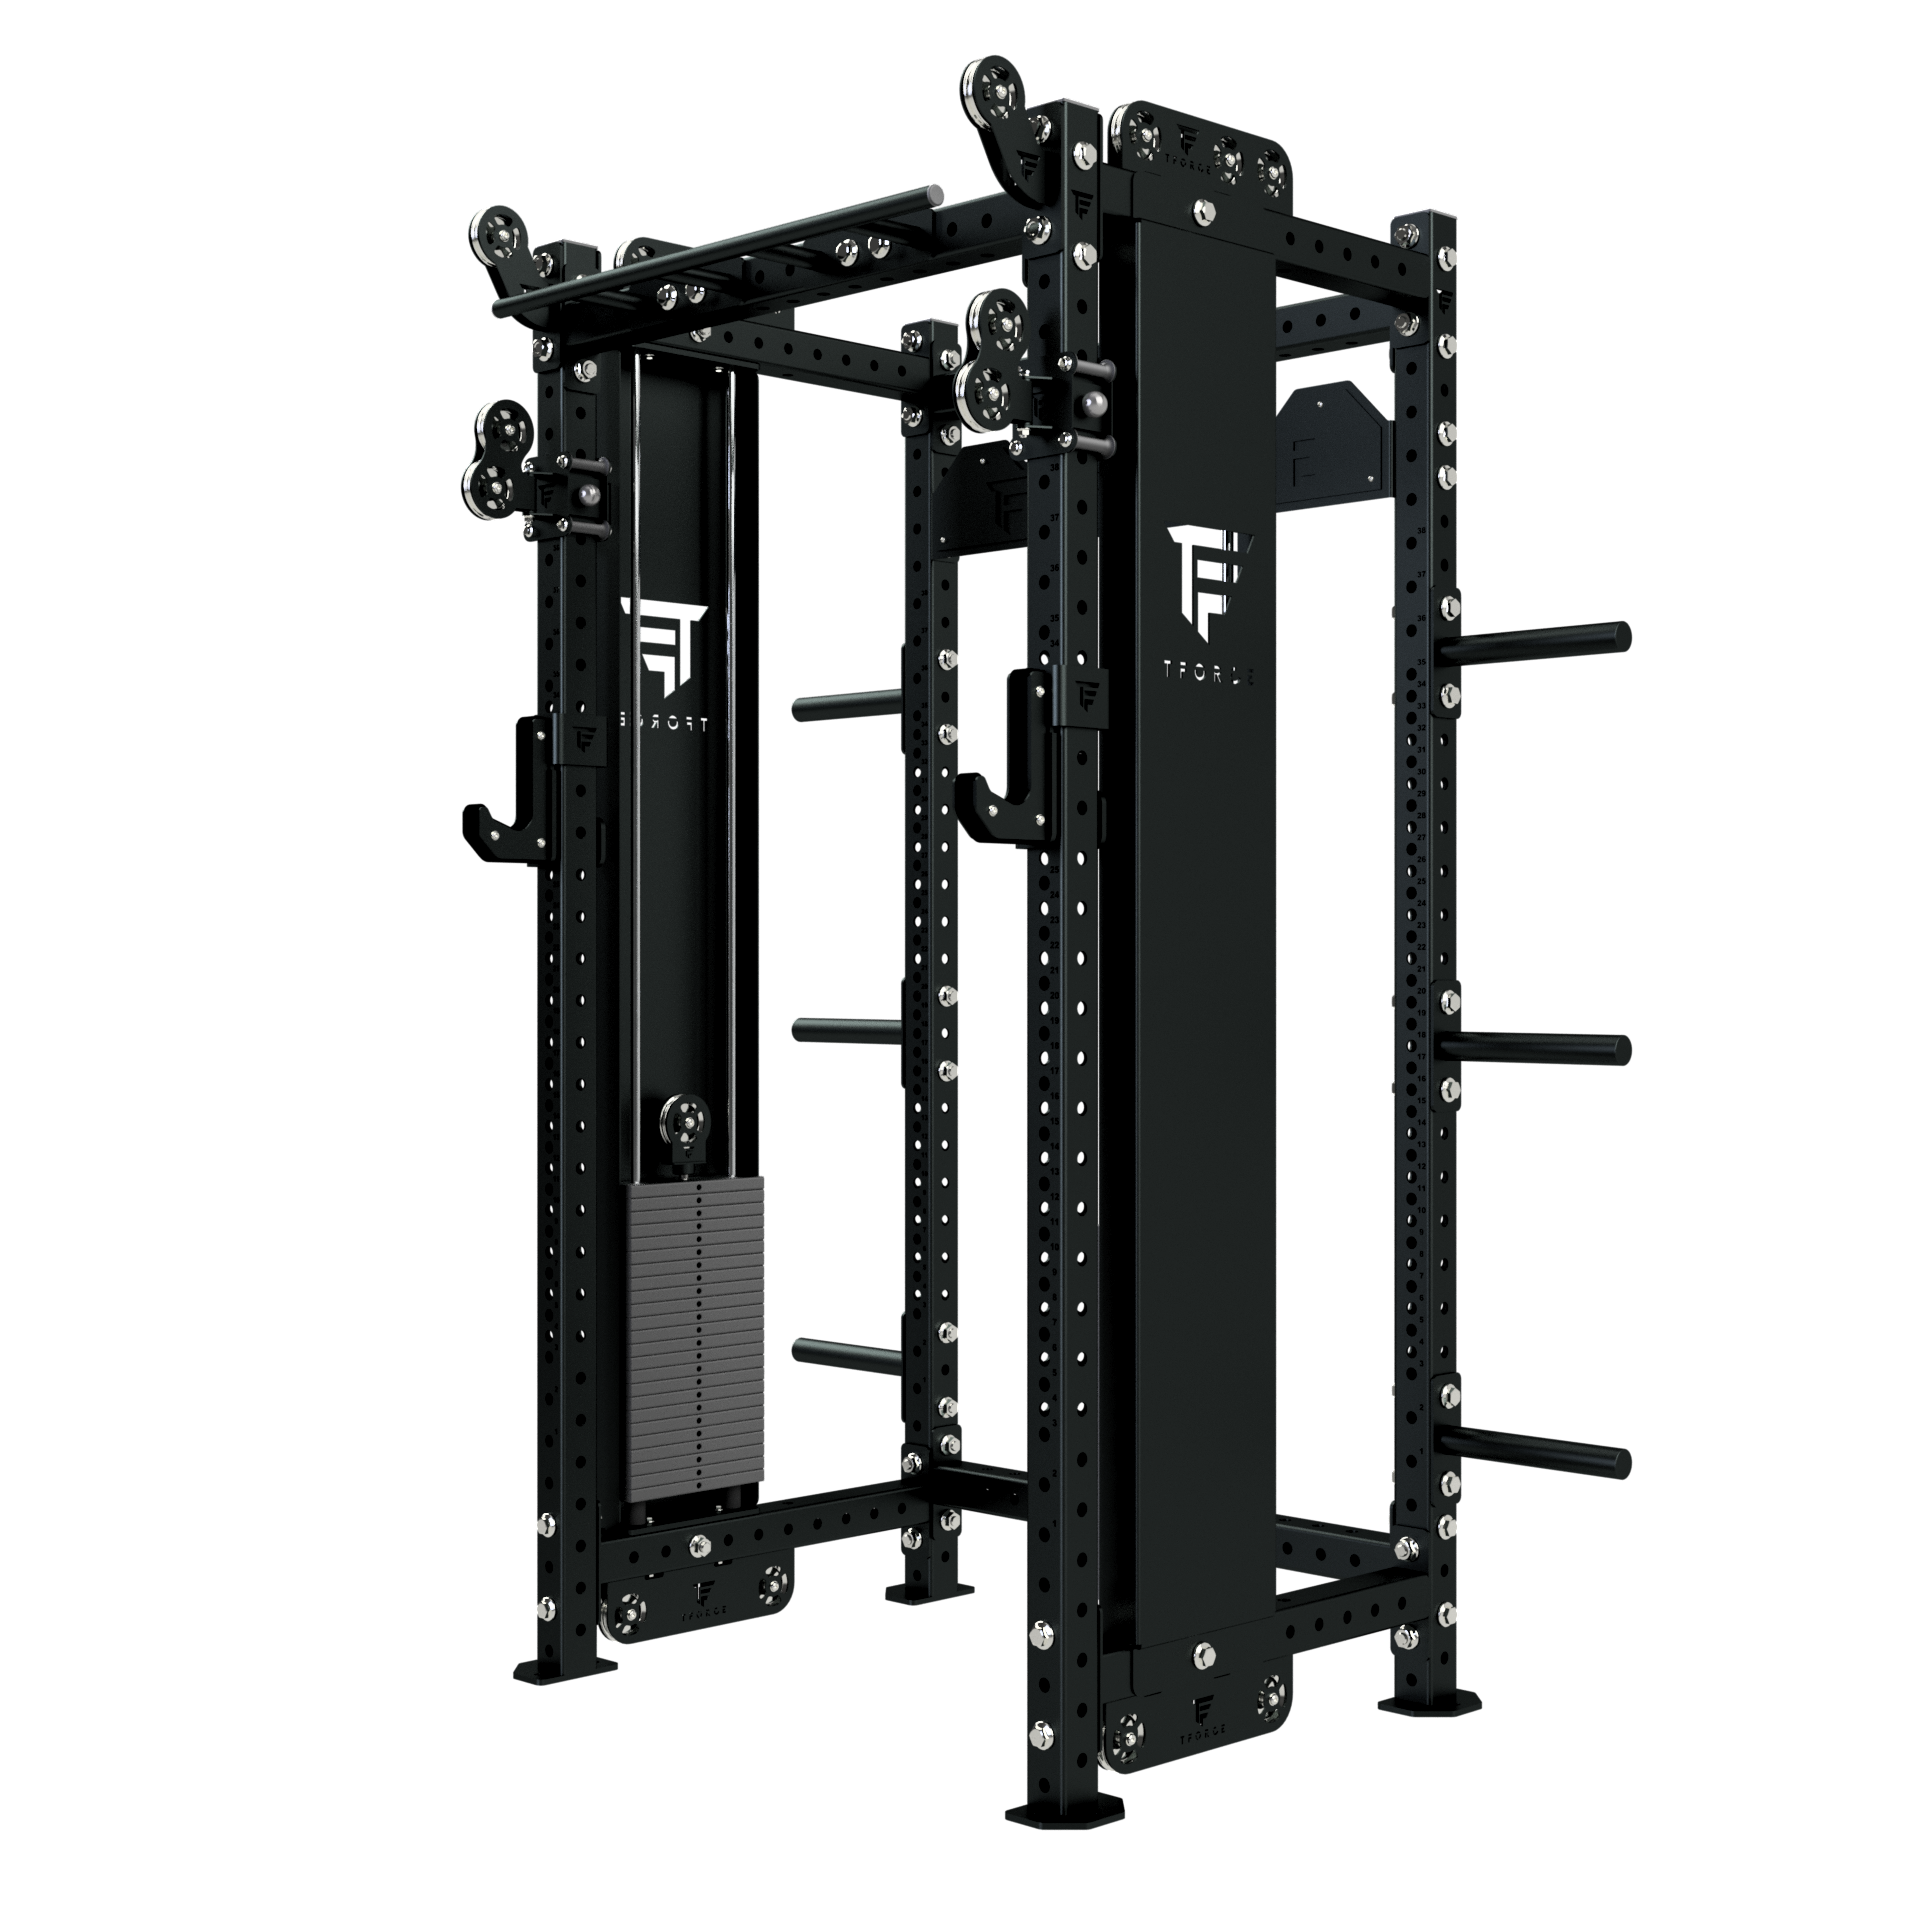 TFORCE UTILITY RACK WITH DOUBLE CABLE STACK AND PULLEY SYSTEM